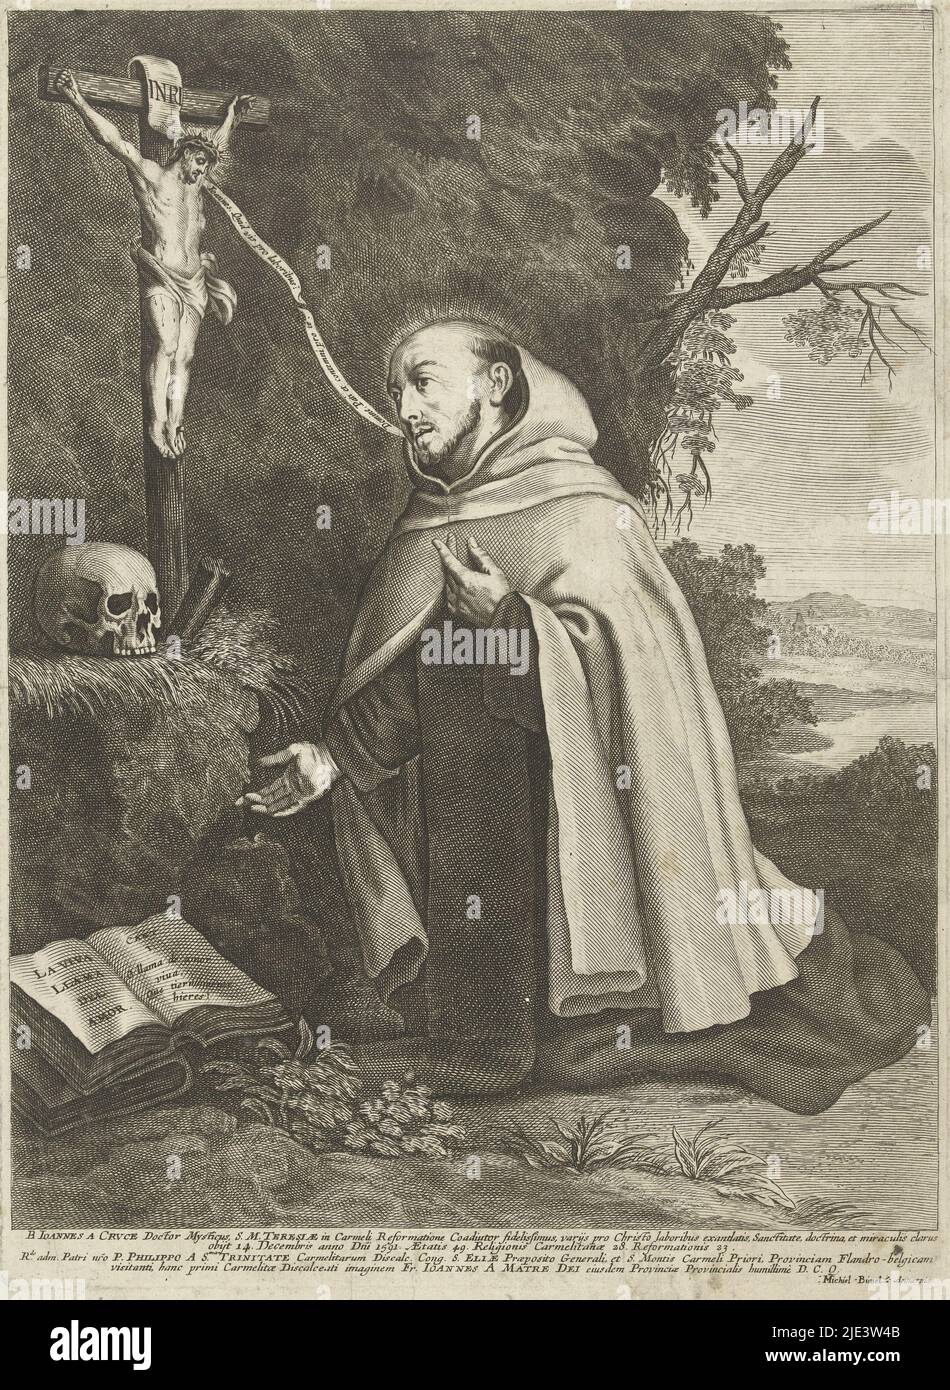 Saint John of the Cross, founder of the Carmelite order In the wilderness, he kneels before a crucifix Both the crucifix and Saint John each possess a banderole with text St John is wearing the robe of his order Below the crucifix is the skull of Adam, symbolizing the washing away of original sin through the death of Christ Next to Saint John lie two books The first book, unfolded, contains the title of one of his mystical works, 'LLama del Amor The print has a Latin caption, Saint John of the Cross, print maker: Michel Bunel, (possibly), print maker: anonymous, (possibly), publisher: Michel Stock Photo